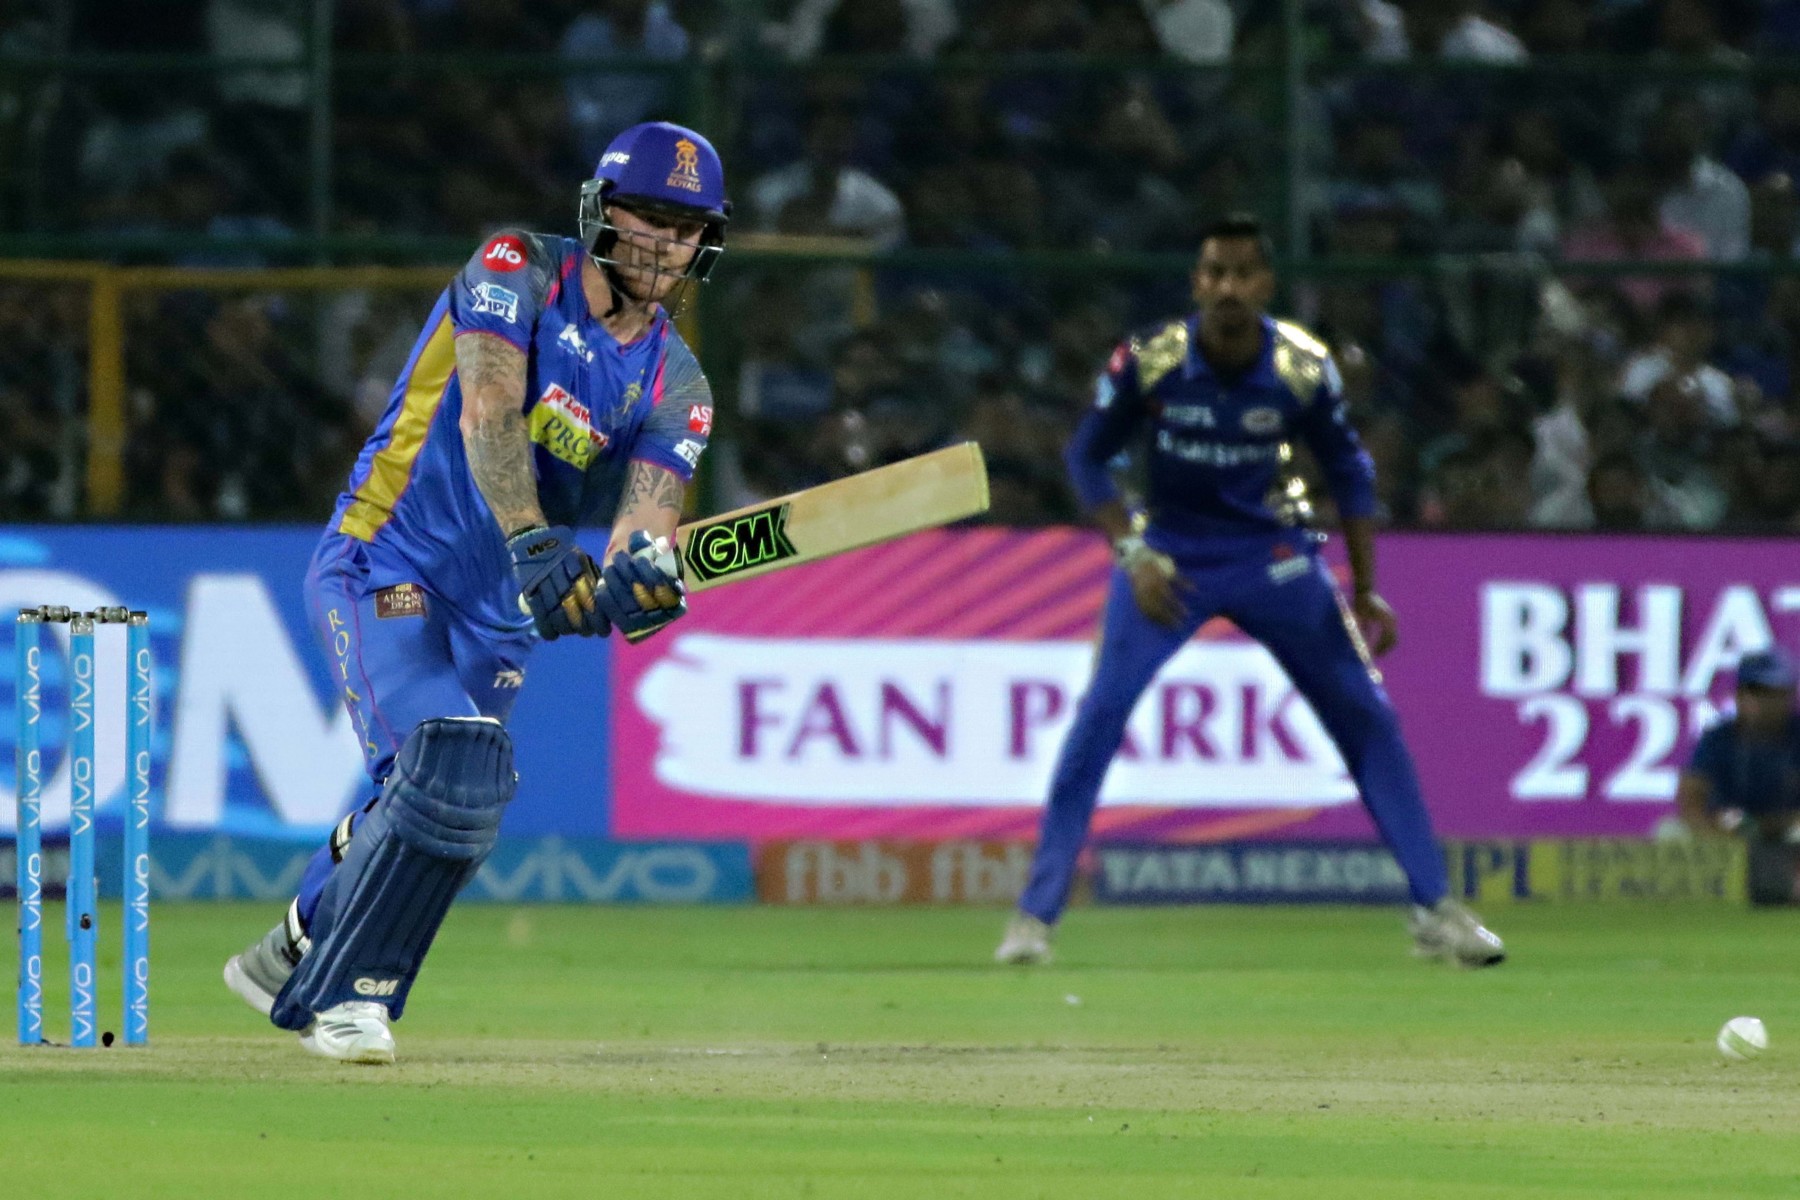 , IPL 2020 English players: Ben Stokes, Jos Buttler and Eoin Morgan among stars in action